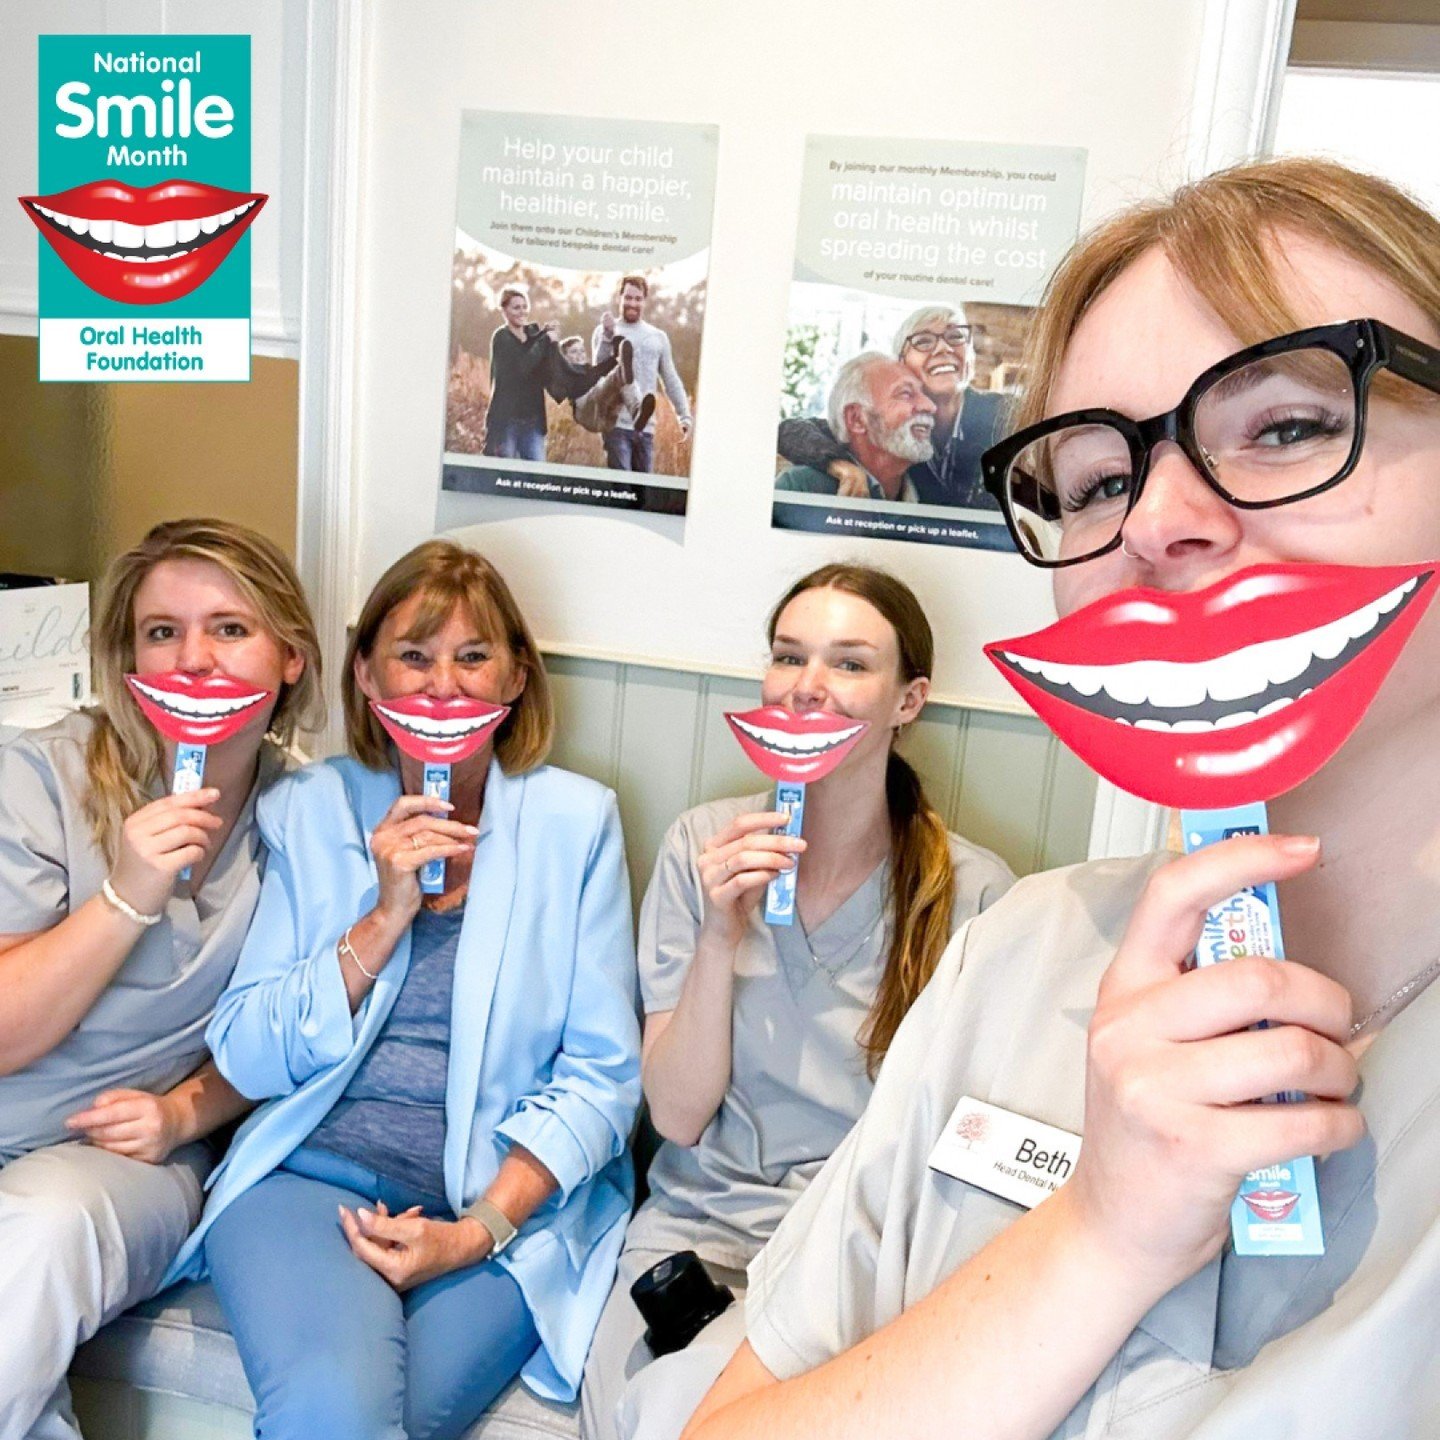 Celebrate National Smile Month with us! 😁✨

Achieving and maintaining a healthy smile is simpler than you think! Just follow these 4 easy steps:

1️⃣ Brush your teeth for two minutes, twice a day using a toothpaste with fluoride.
2️⃣ Clean between y